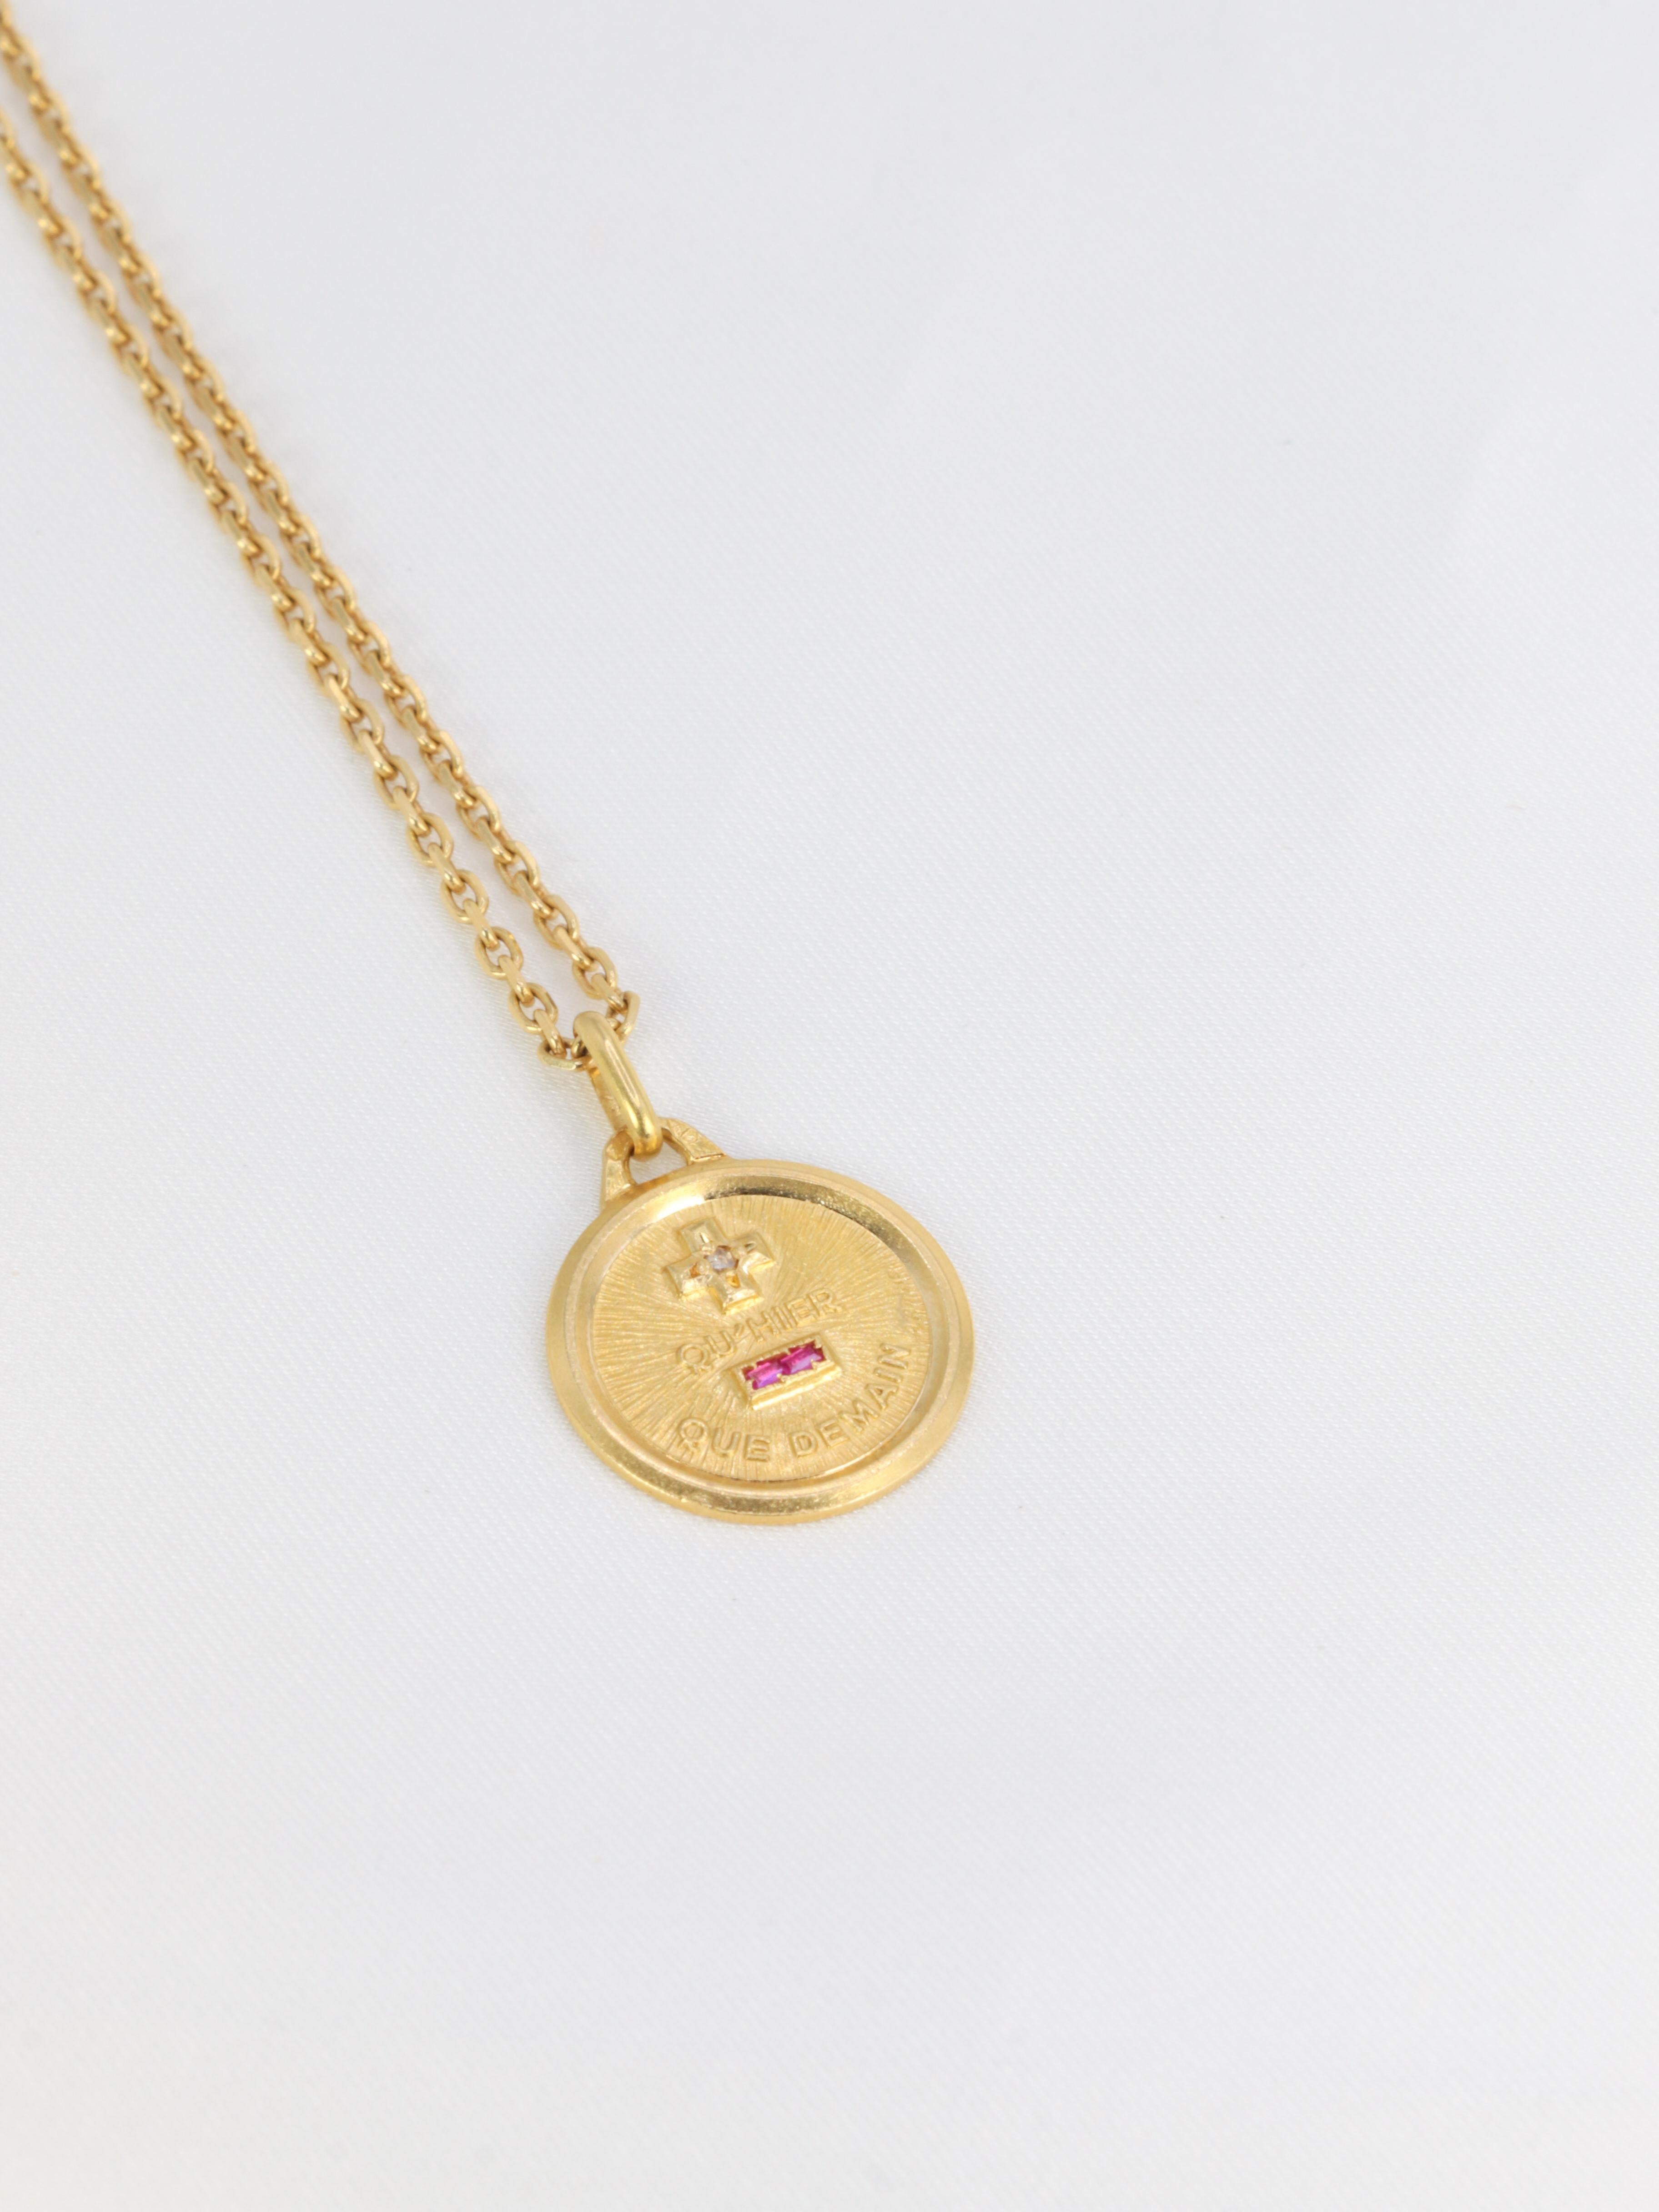 18Kt (750°/°°) yellow gold Love medal set with baguette-cut synthetic rubies and a small rose-cut diamond.
The famous phrase Plus qu'hier Moins que demain, inspired by two verses by Rosemonde Gérard Rostand, is written on the medal.
French work from